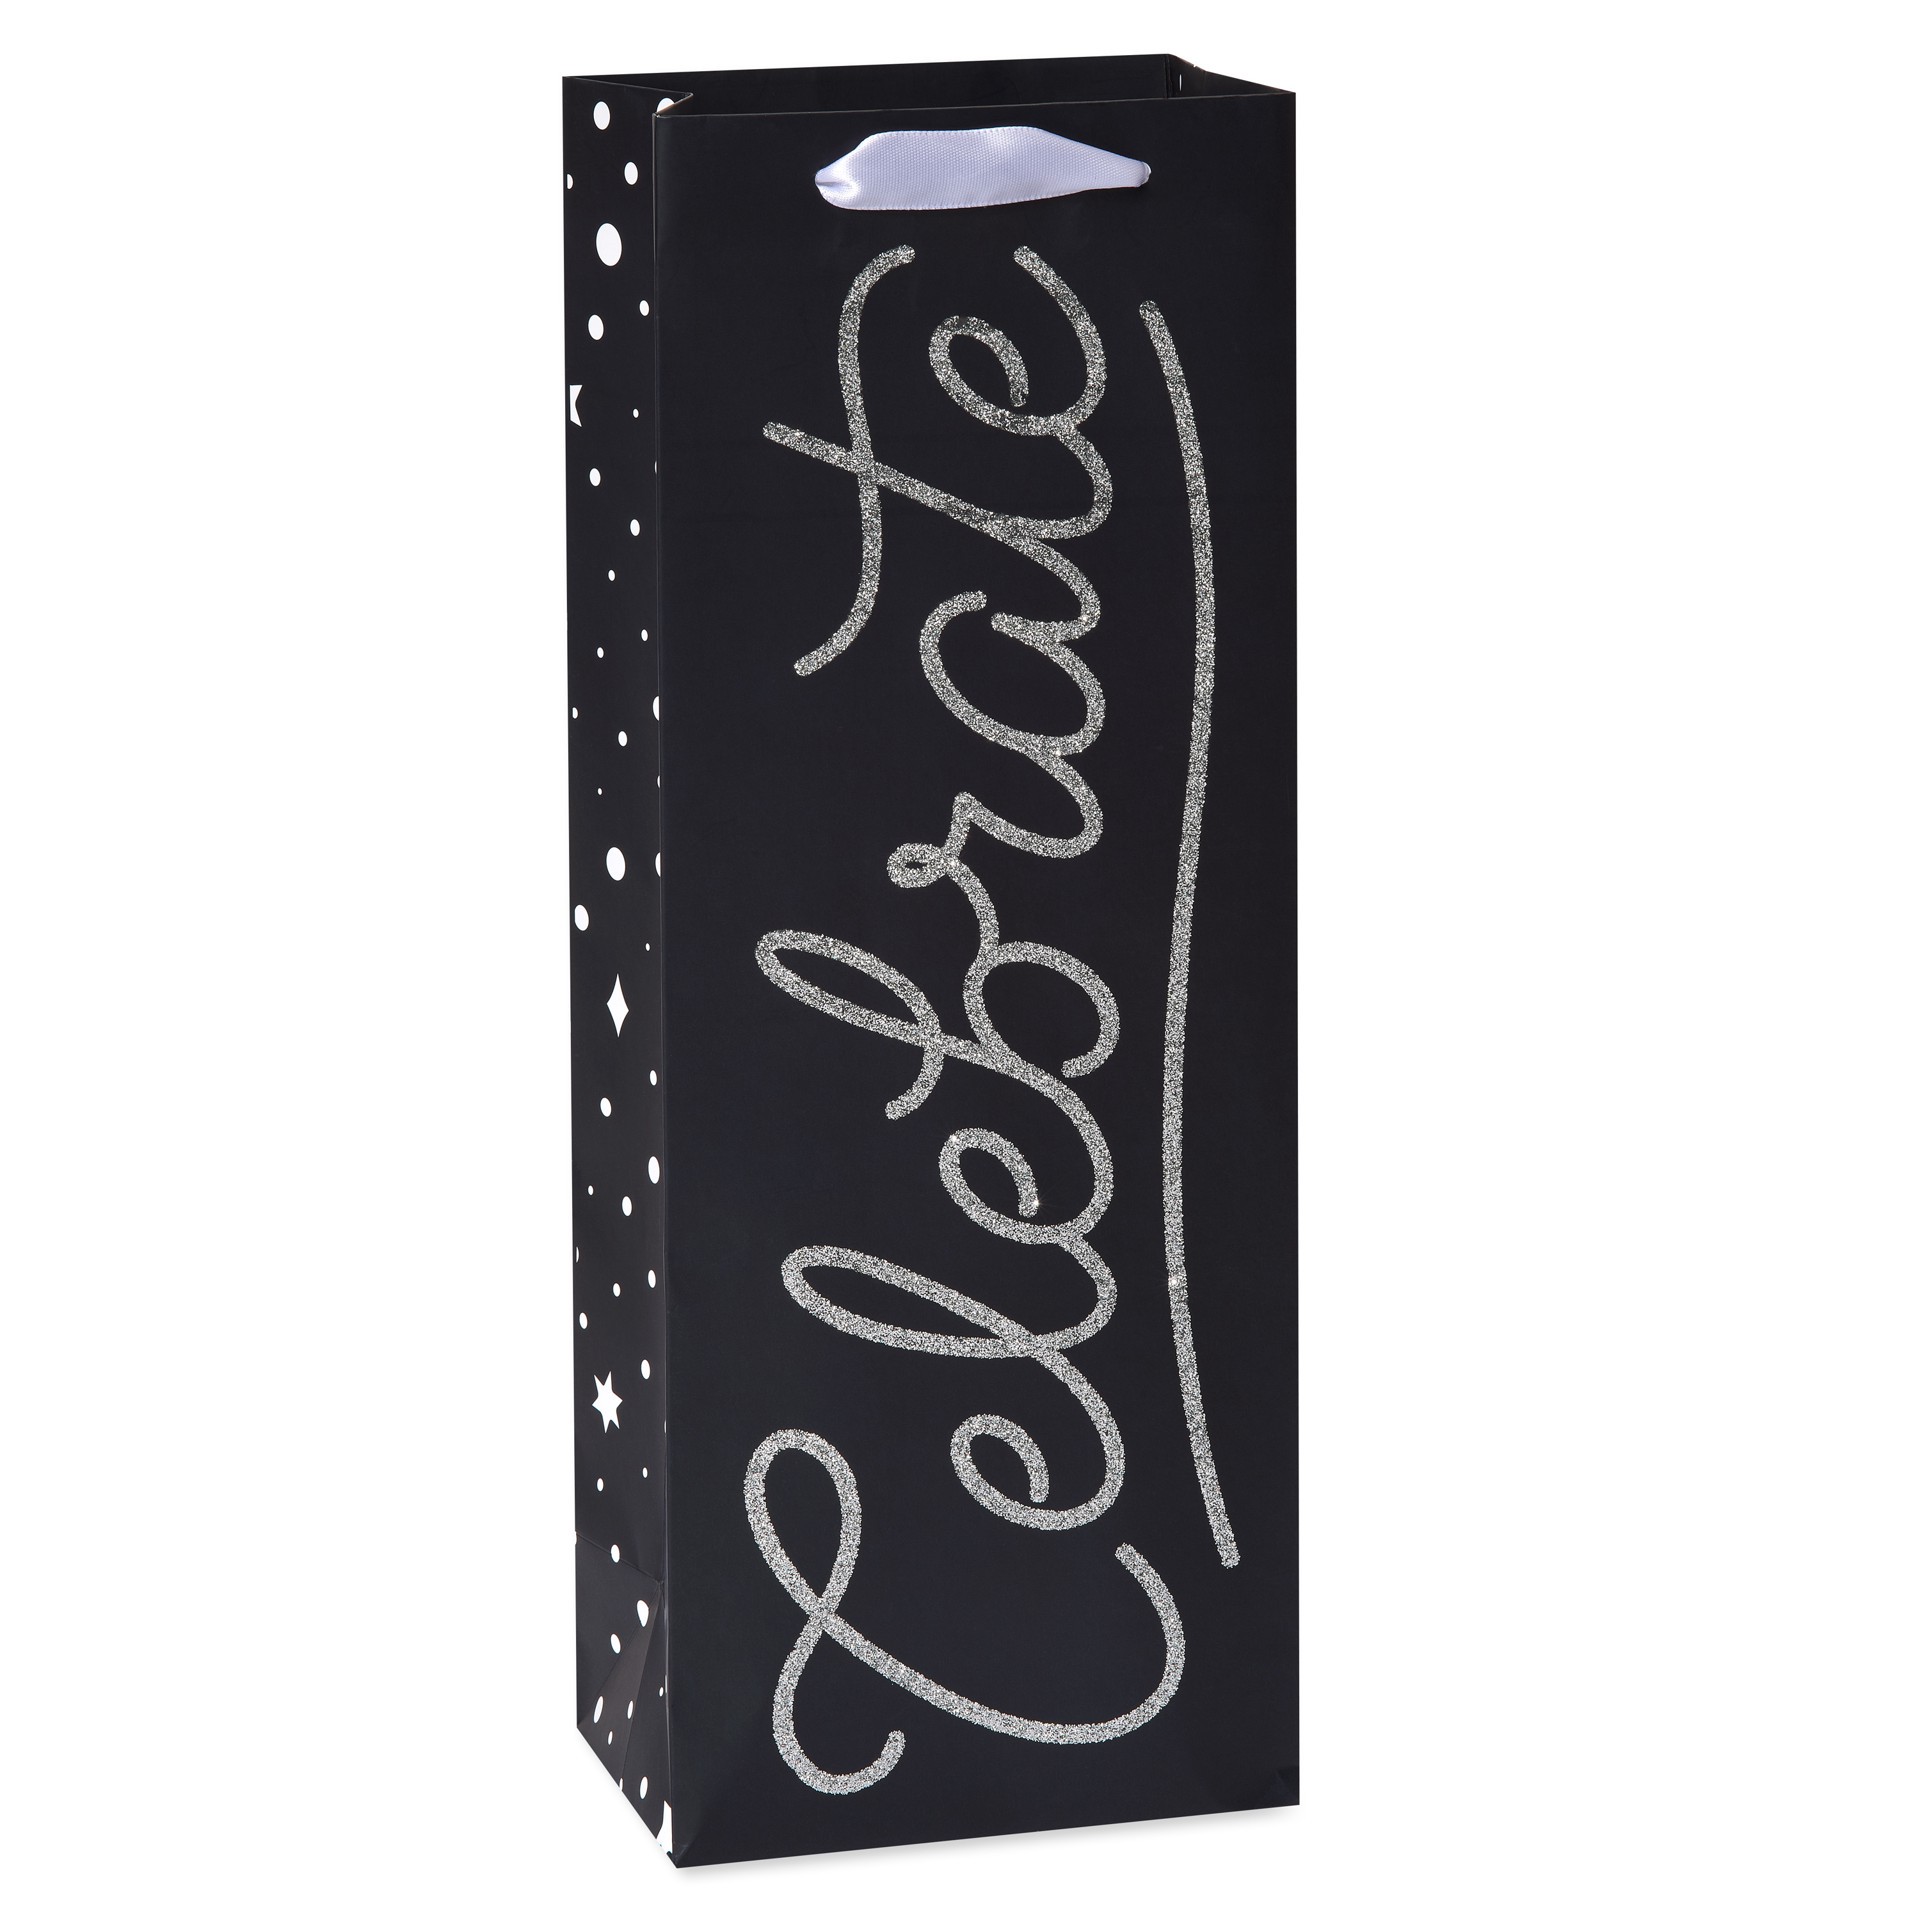 slide 1 of 9, American Greetings When you're gifting a bottle of something happy, choose this “Celebrate” beverage bag! This beverage bag features the word “Celebrate” embellished in chrome silver glitter on a dramatic black background. Top off your beverage gift with coordinating tissue paper (sold separately) to make your presentation extra celebratory! Bag can hold a wine or liquor bottle., 1 ct